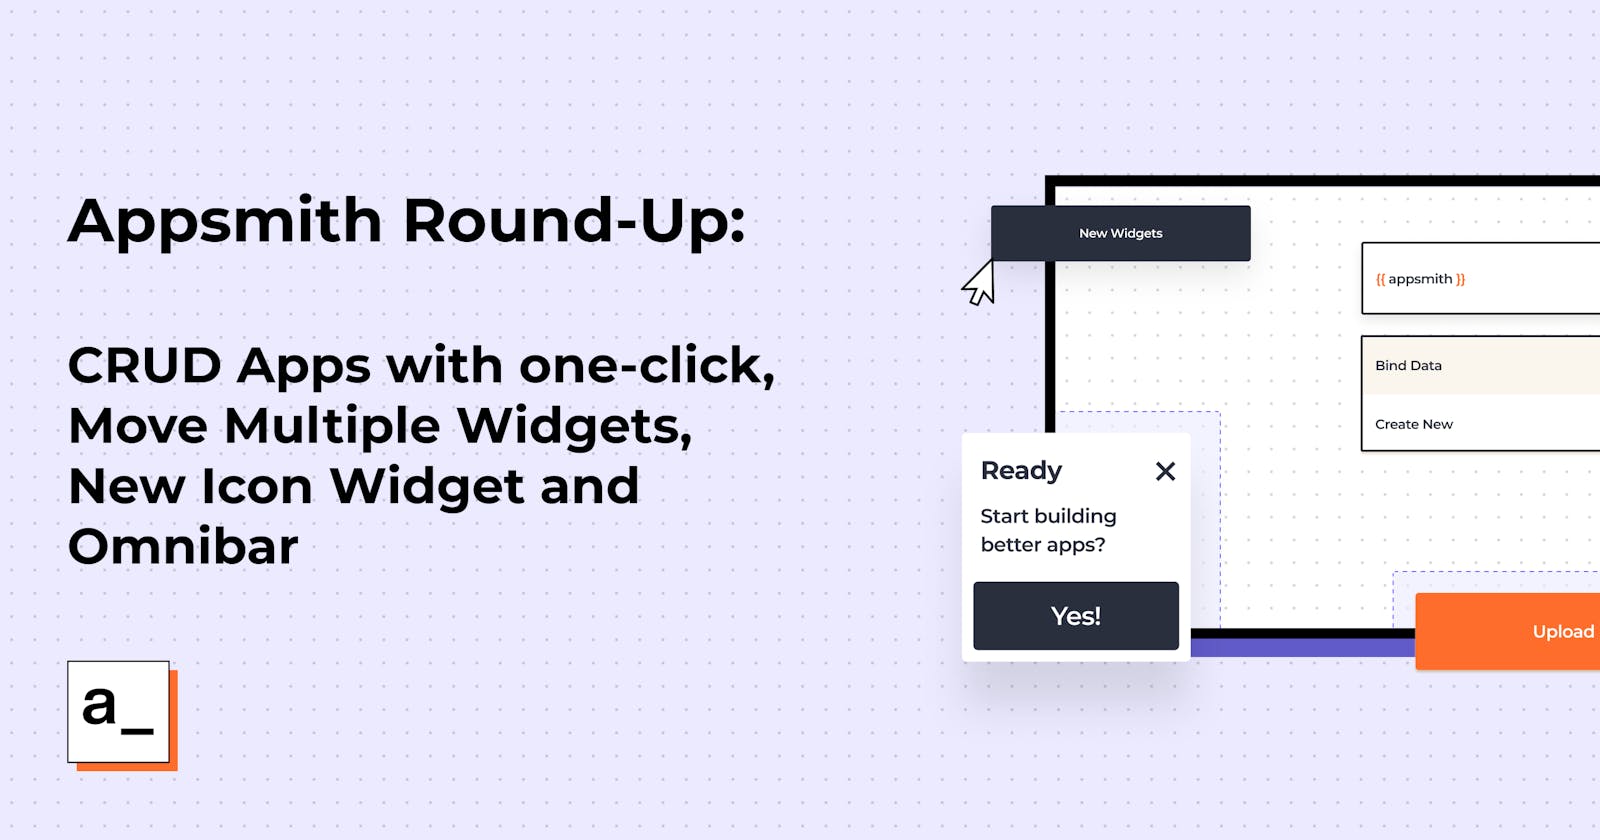 Appsmith Roundup: Build CRUD Apps with one-click, Move Multiple Widgets, New Icon Widget and Omnibar